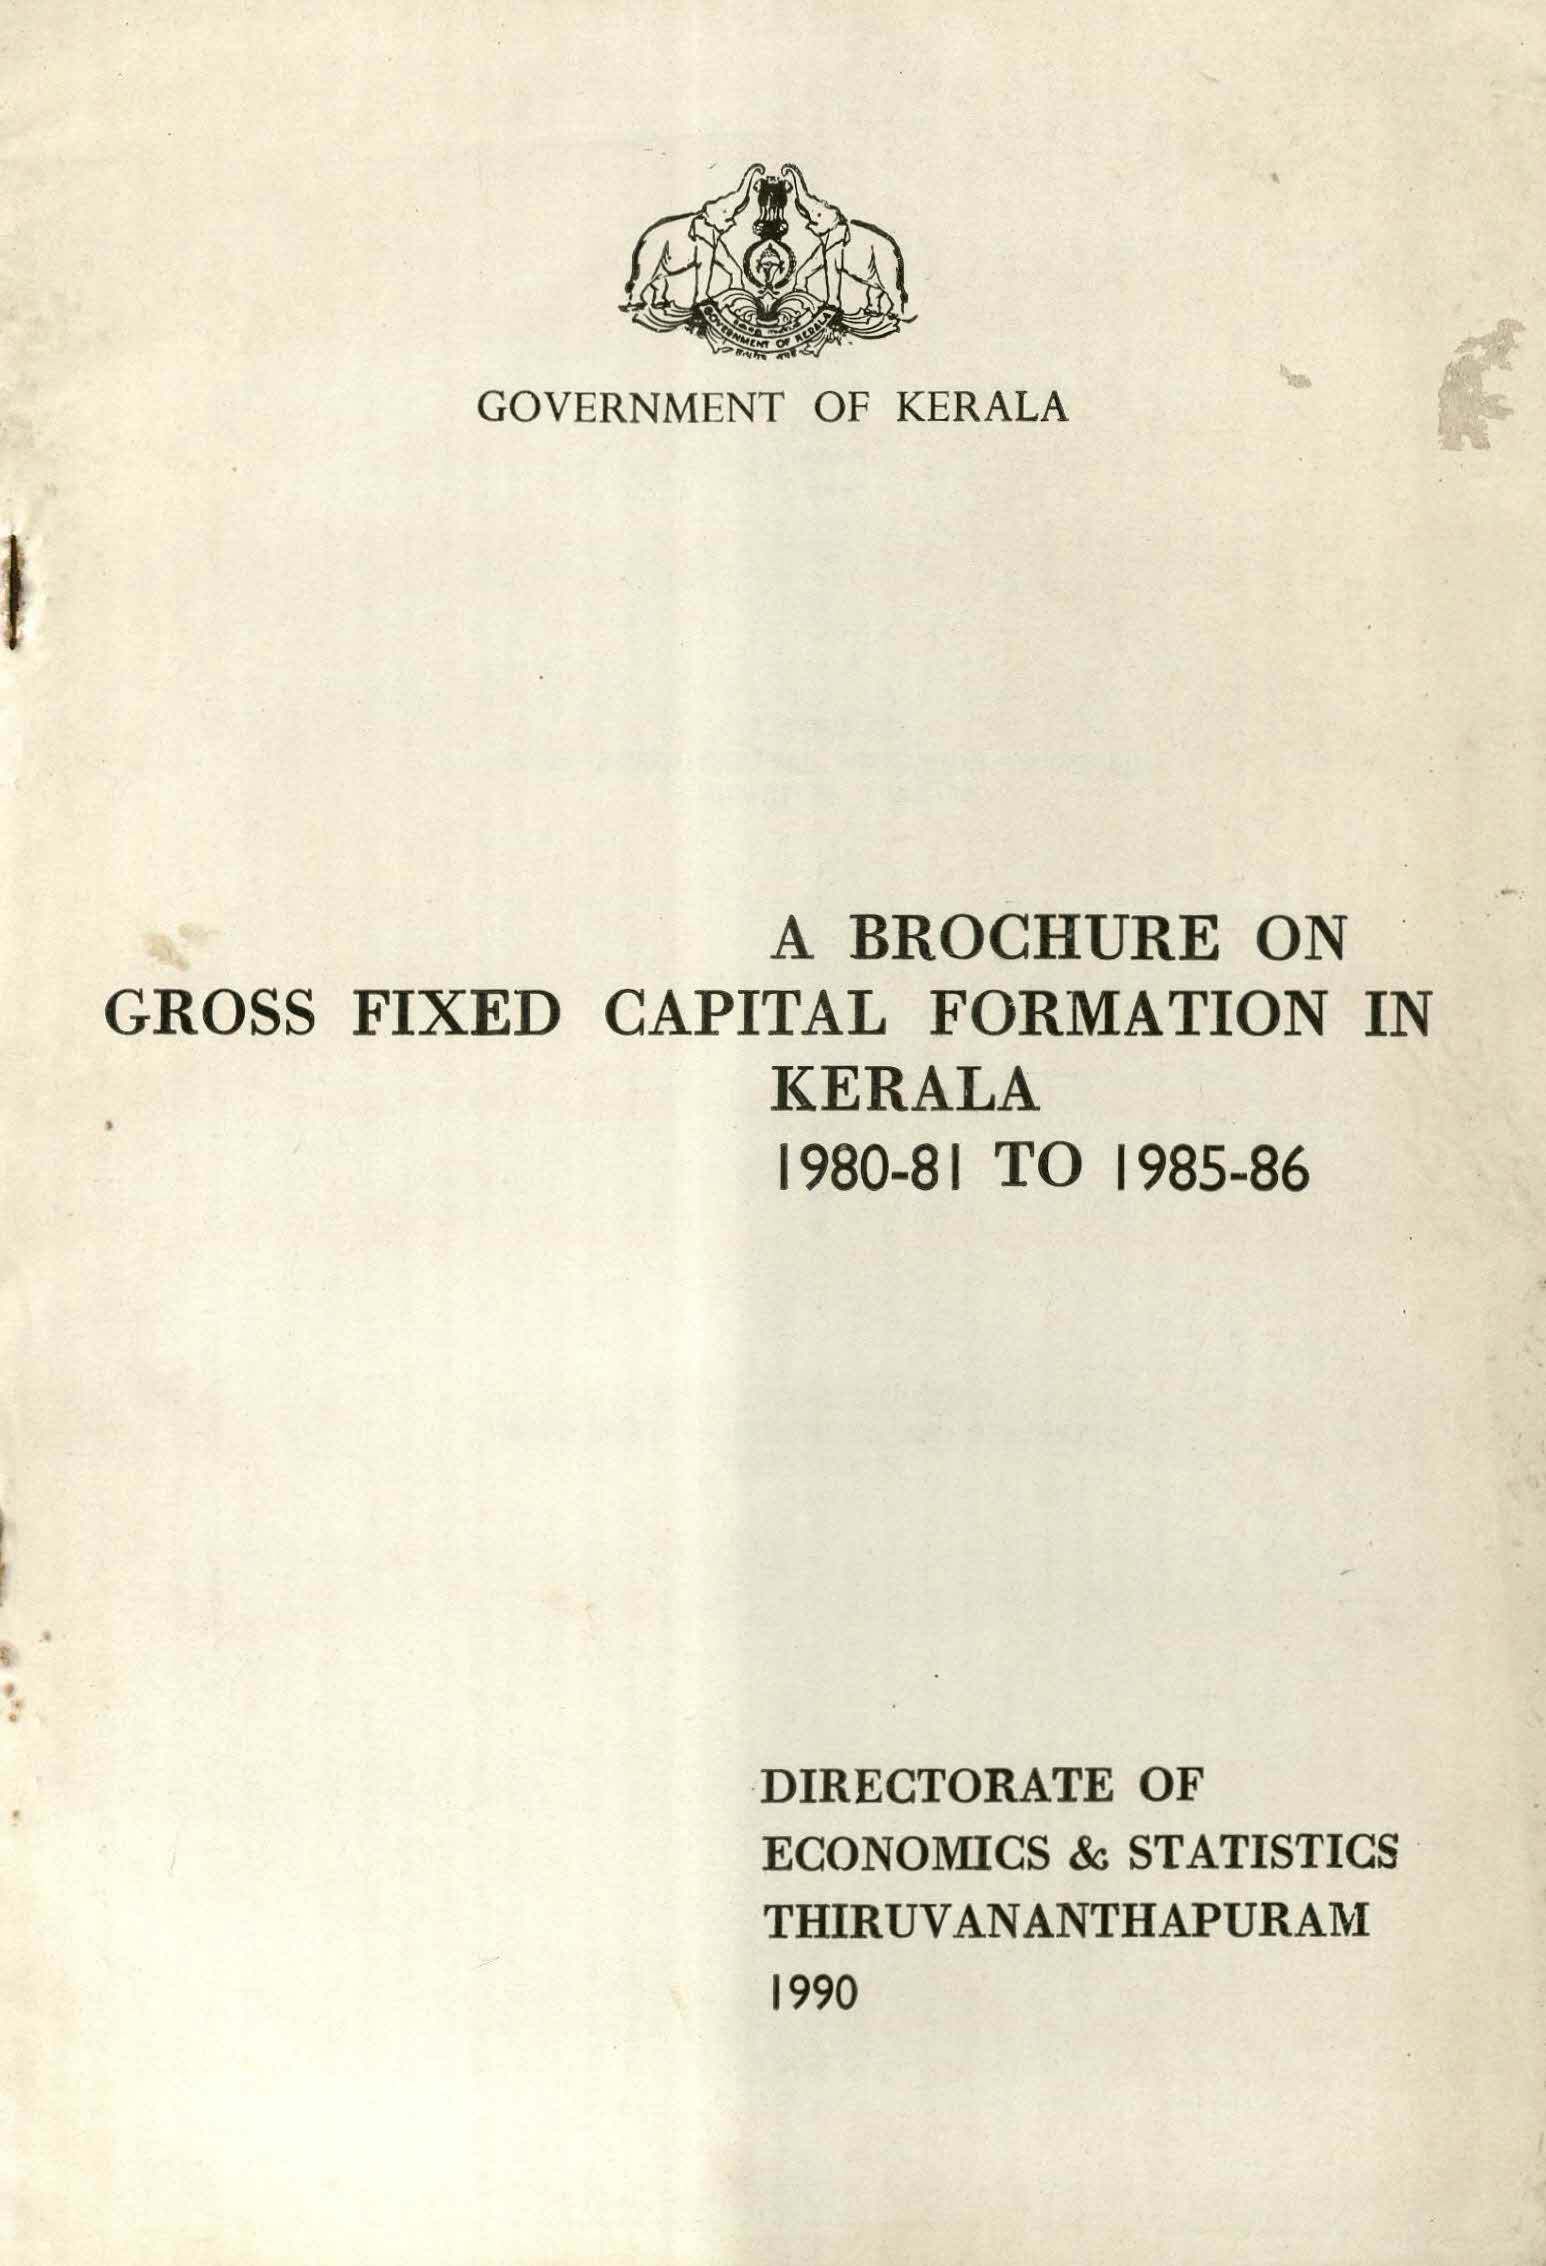 A BROCHURE ON GROSS FIXED CAPITAL FORMATION IN KERALA 1980-81 TO 1985-86